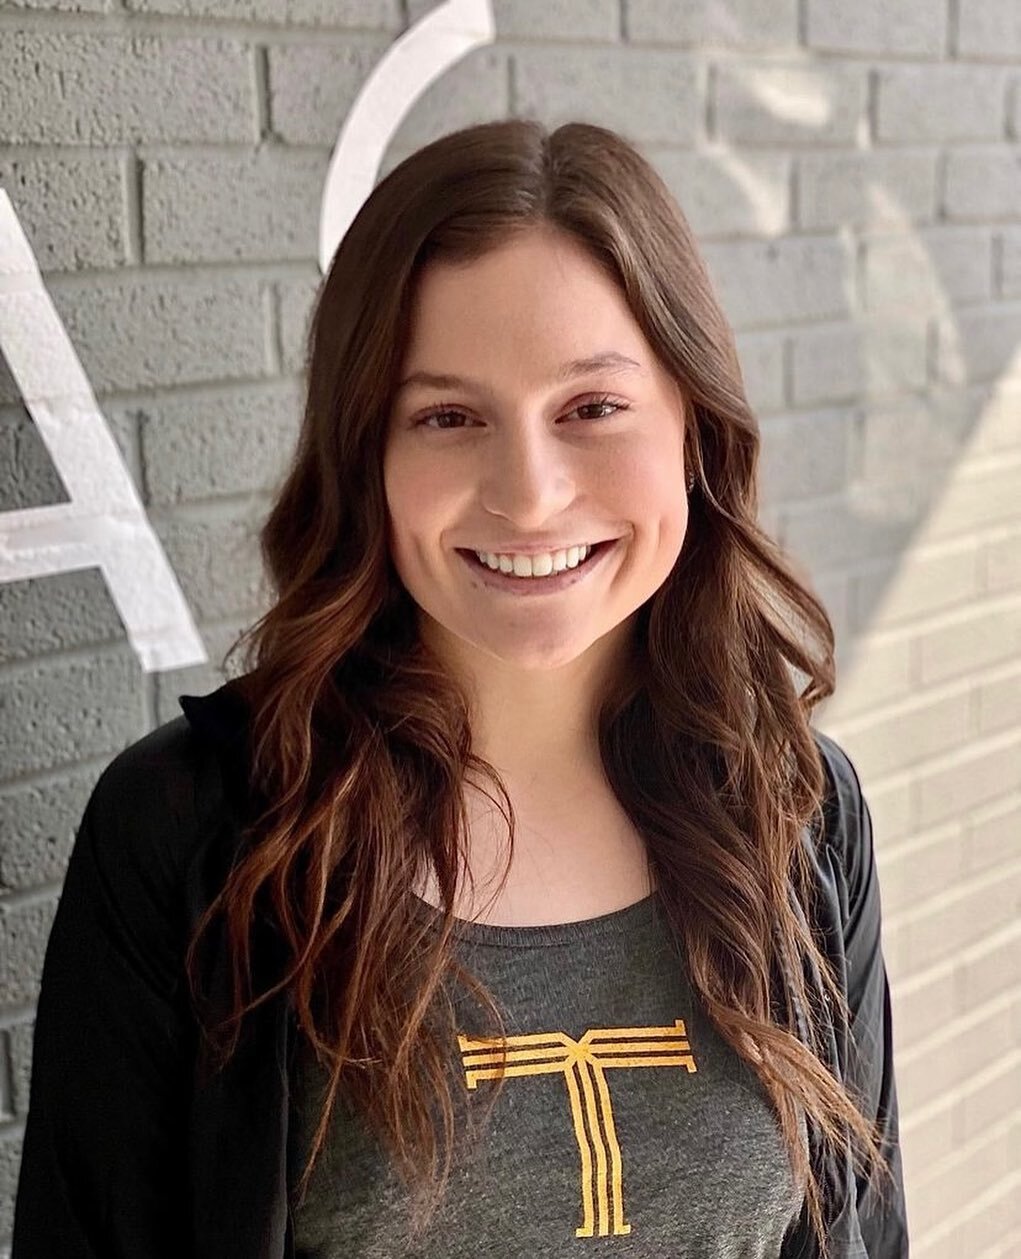 Who's that girl&hellip;la, la, la, la, la, la, la, la, la, la, la&hellip;

MEET @briana.mullenix, our new Assistant Office Coordinator. We are thrilled that she&rsquo;s part of the Trifecta family. She can&rsquo;t wait to meet all of you! 💛💛💛